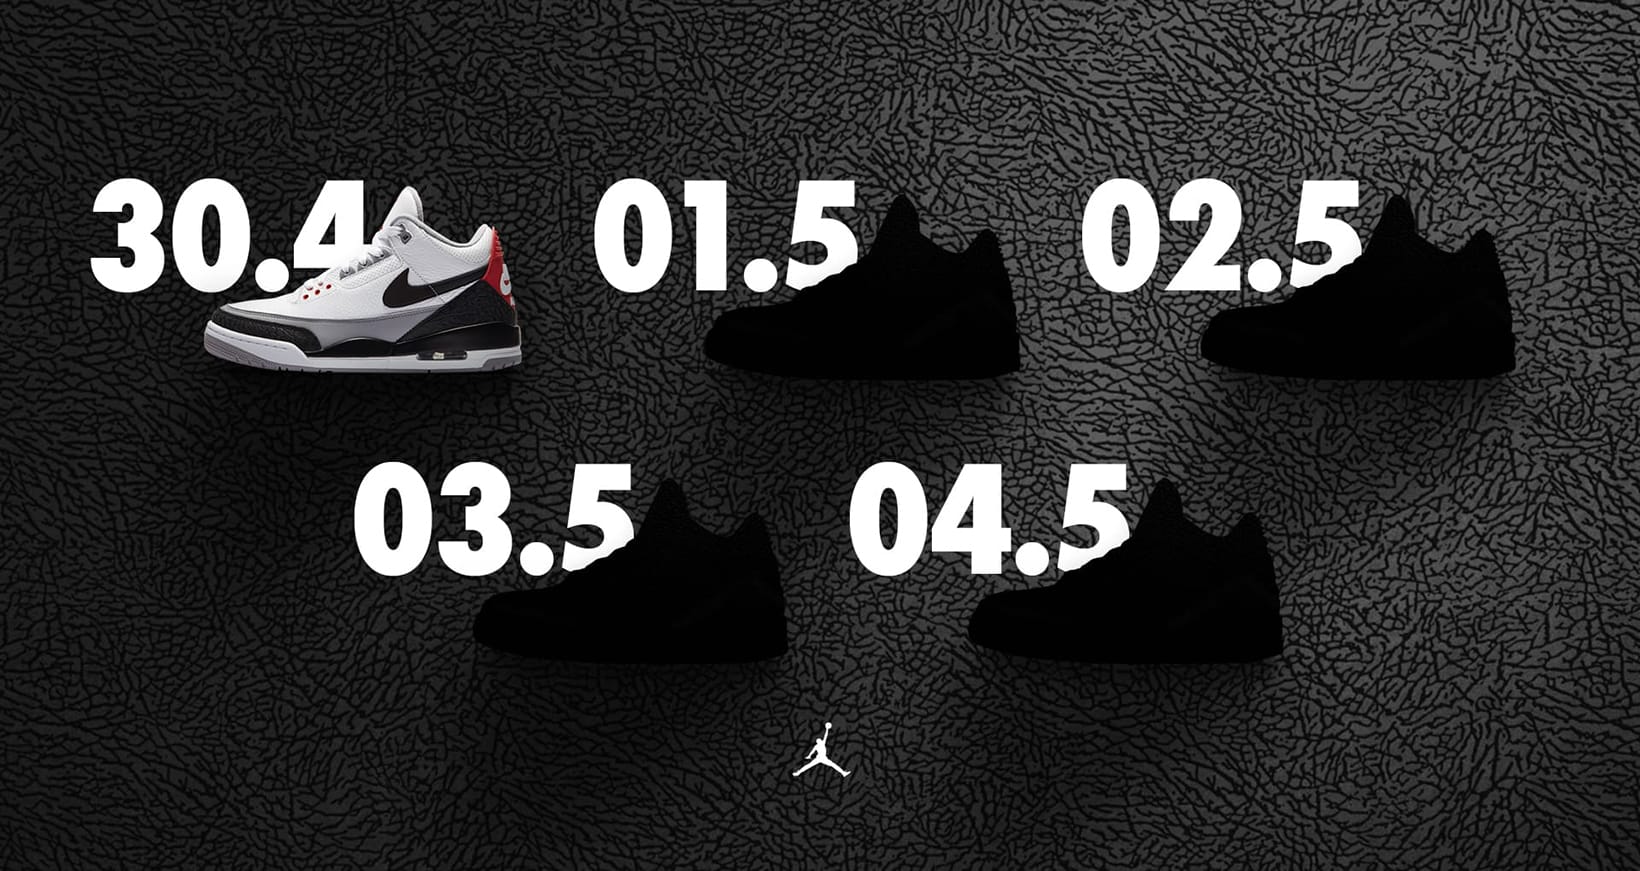 jordan 3s that came out today